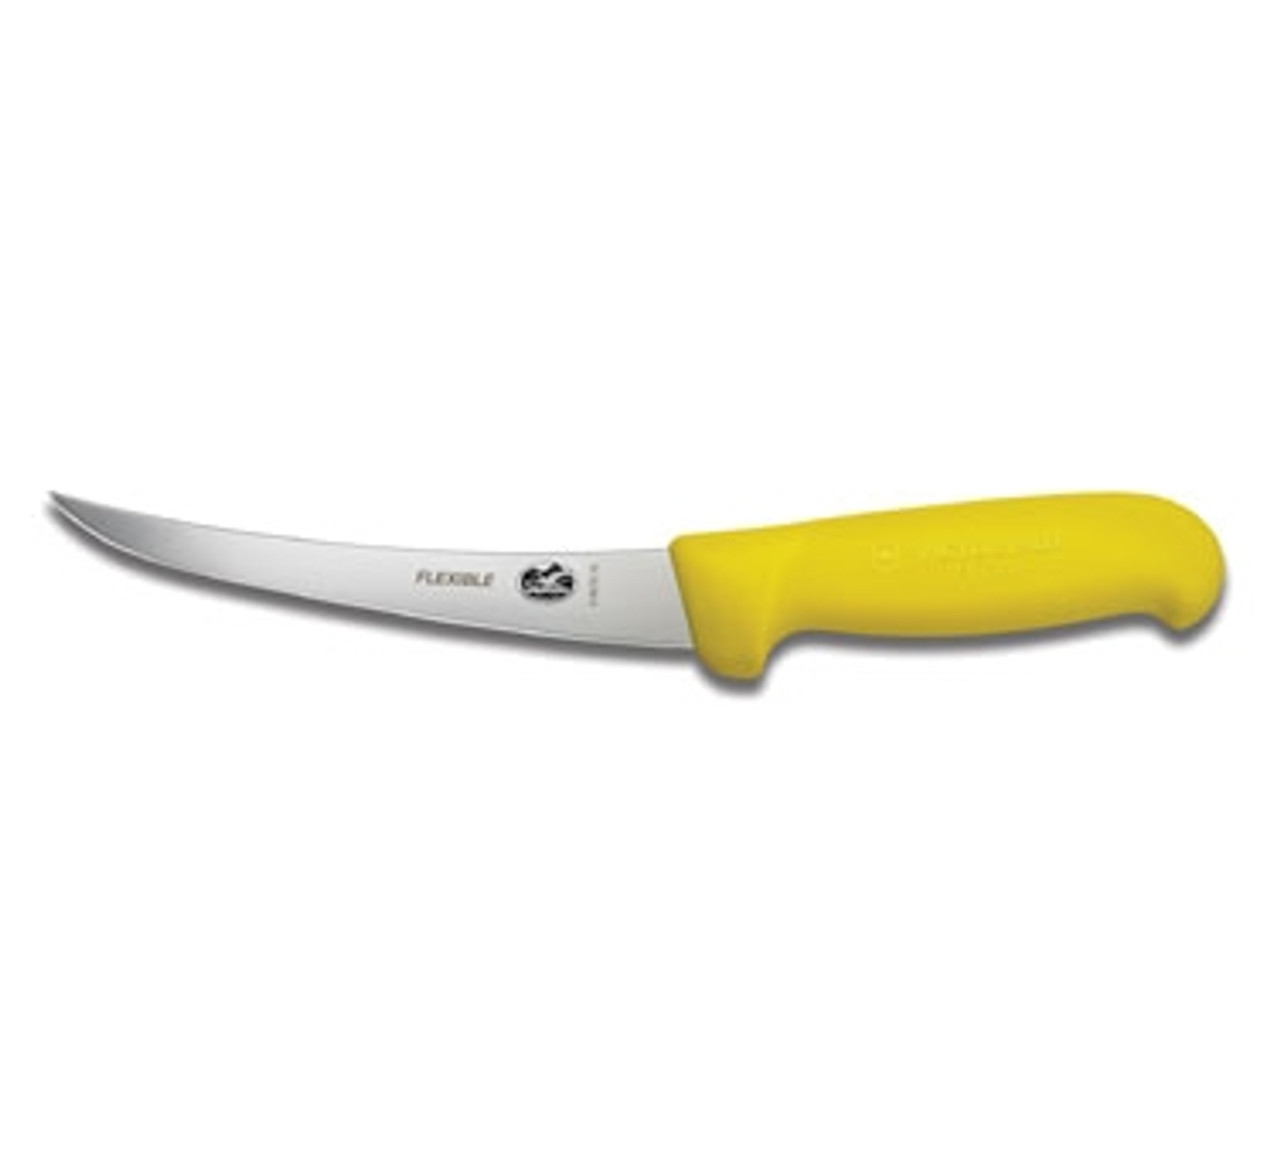 Victorinox 5.6618.15 6" Curved Boning Knife with Yellow Fibrox Handle